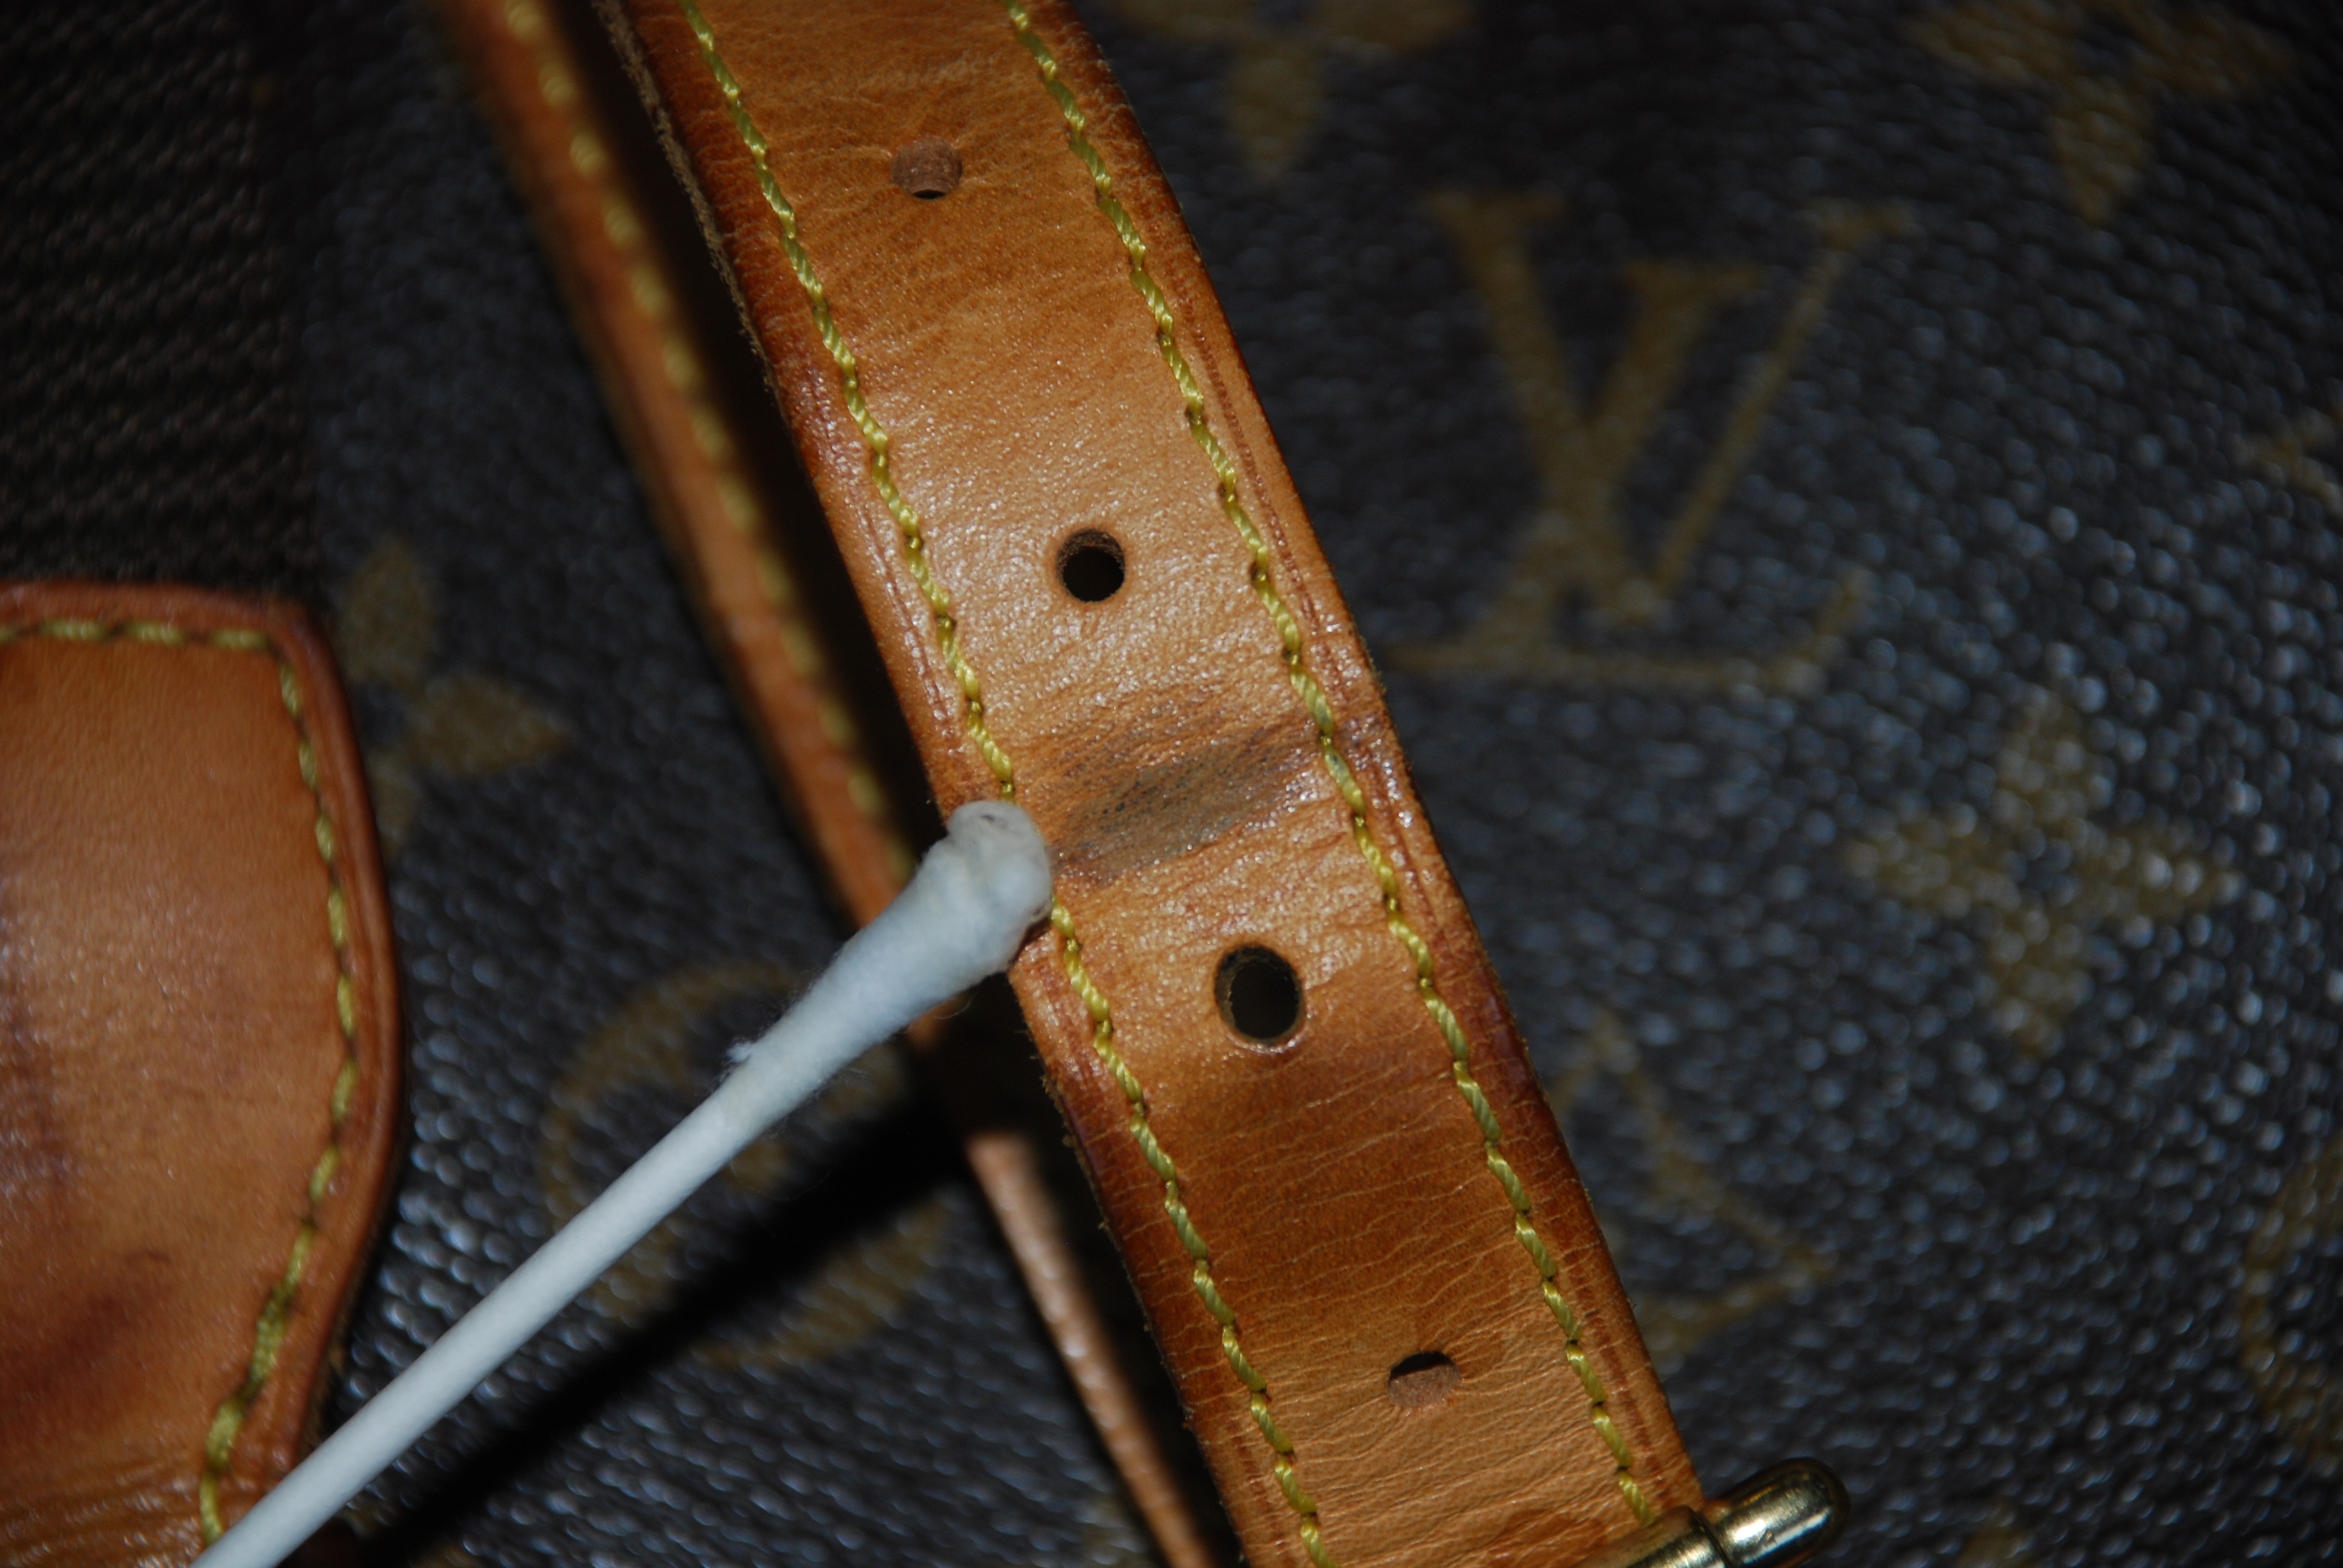 Louis Vuitton - Repair Surface Damaged Louis Vachetta leather from scuffing with a Magic Eraser.